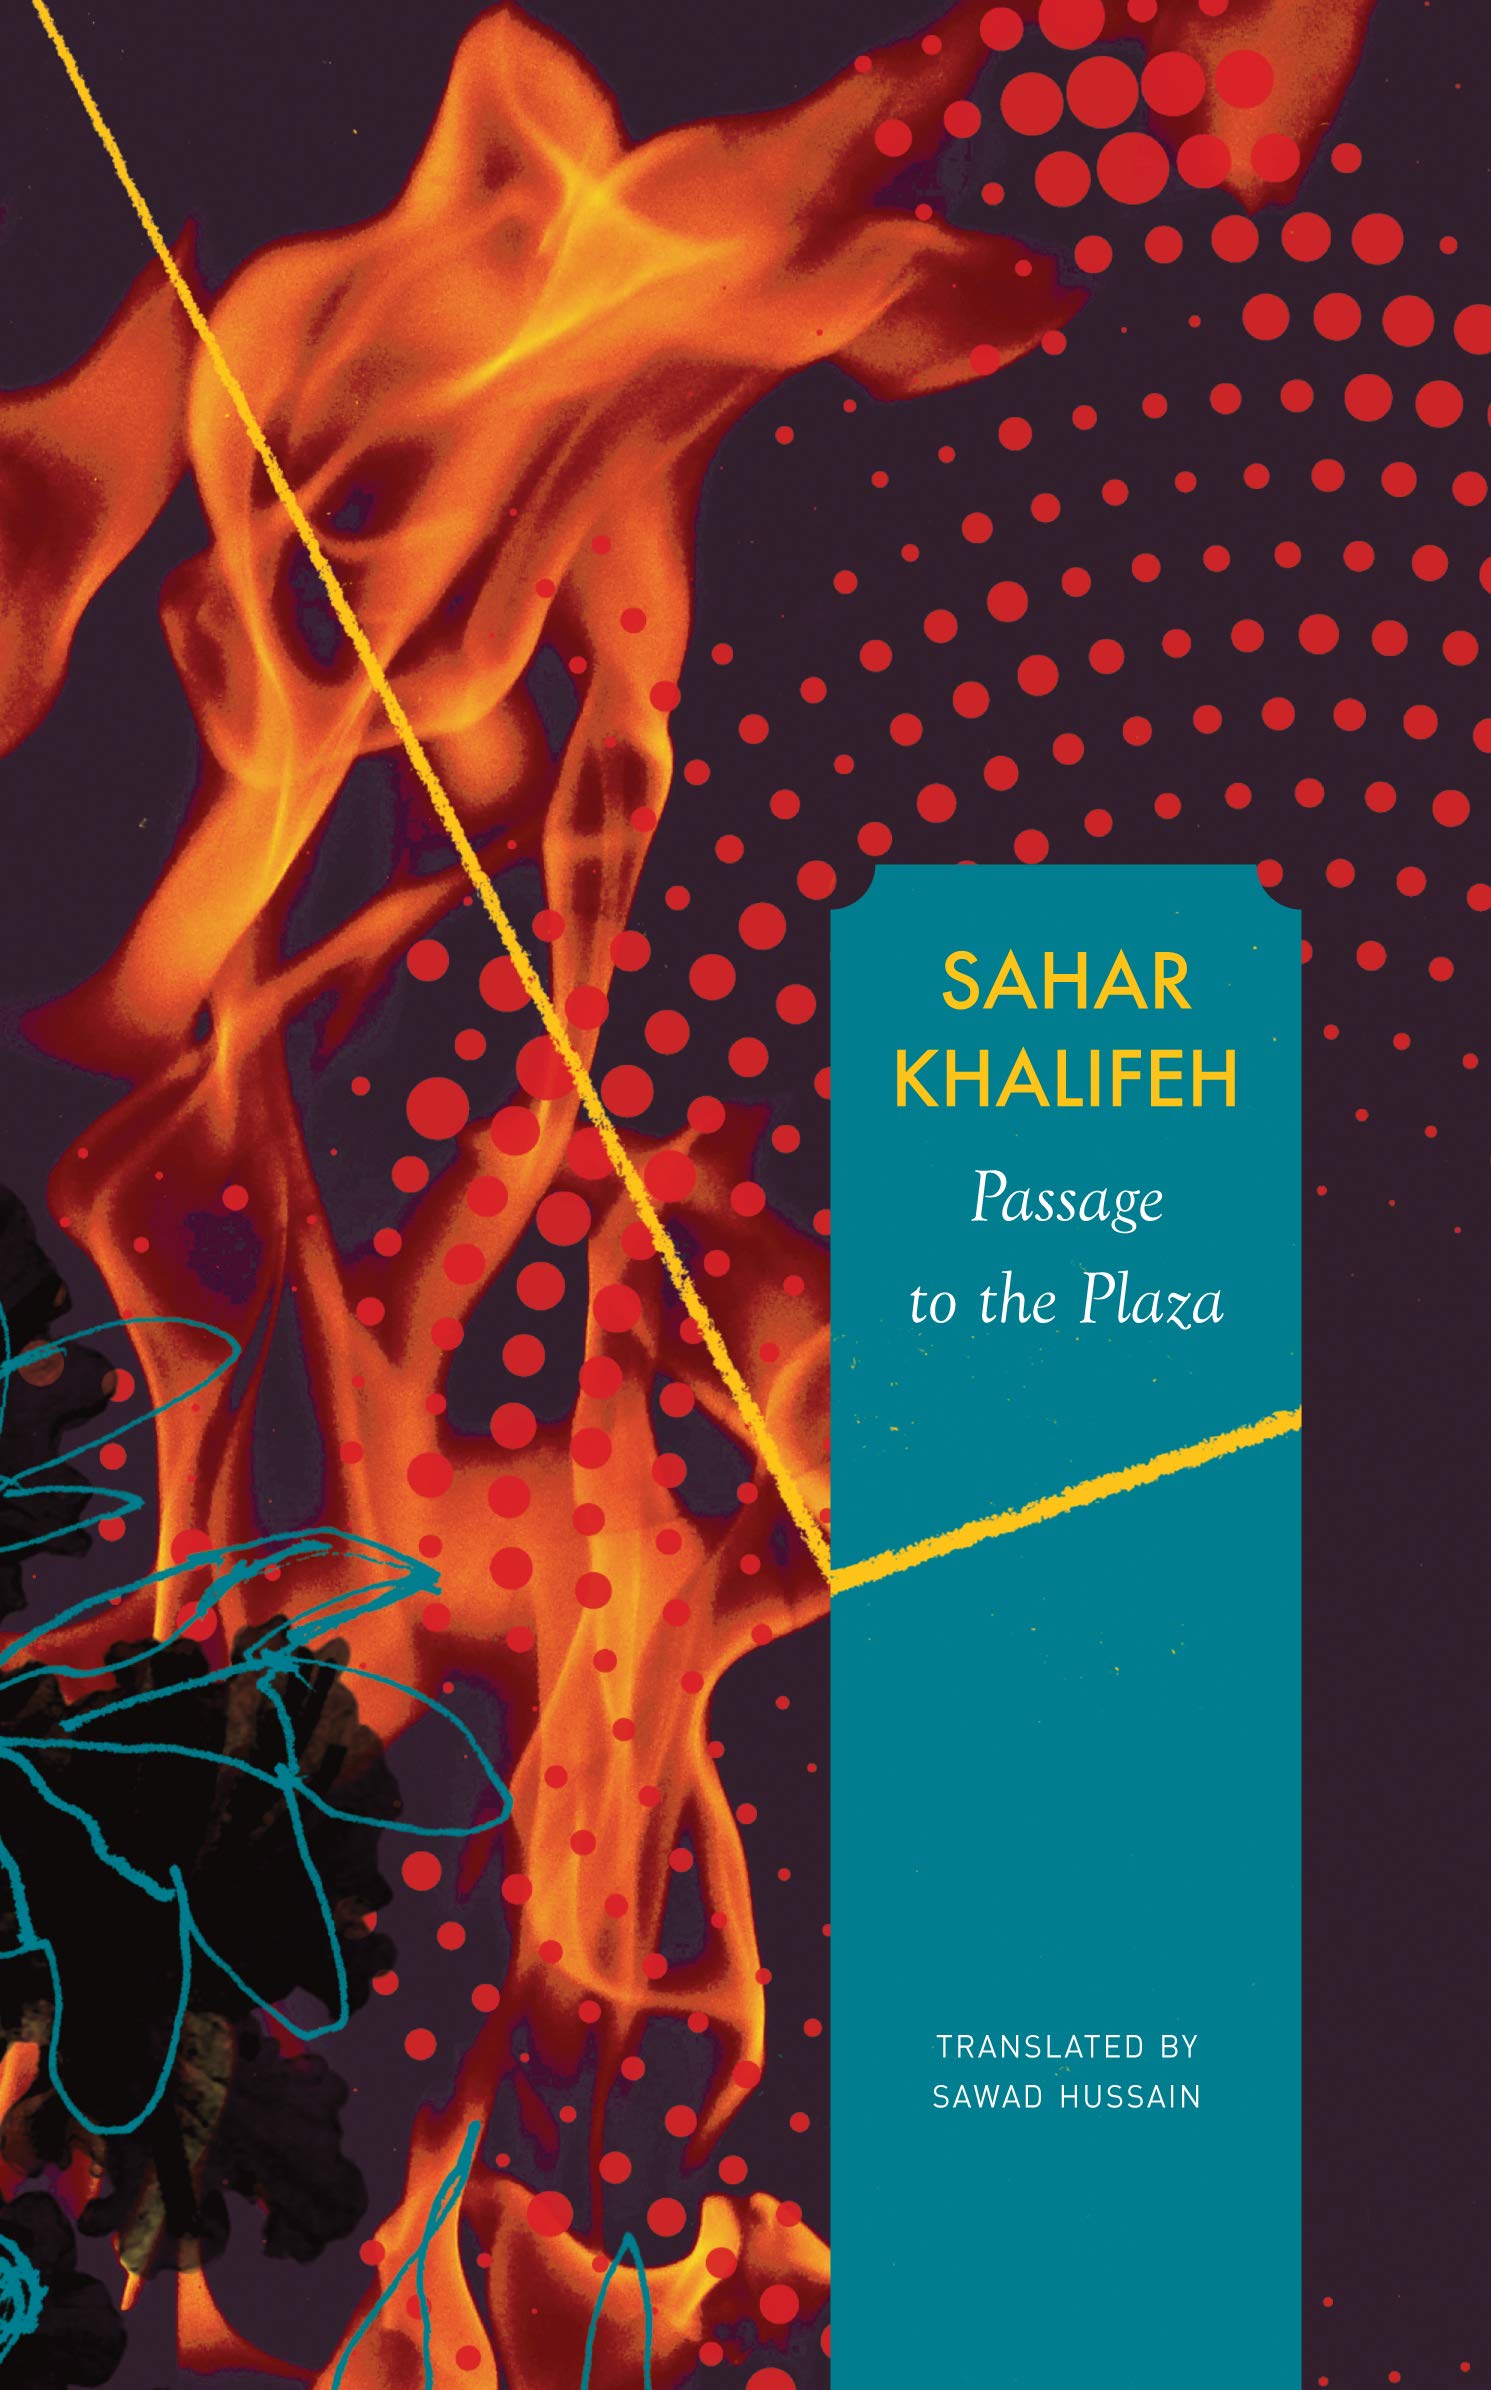 Cover of Sahar Khalifeh’s "Passage to the Plaza", translated into English by Sawad Hussain (published by Seagull Books)